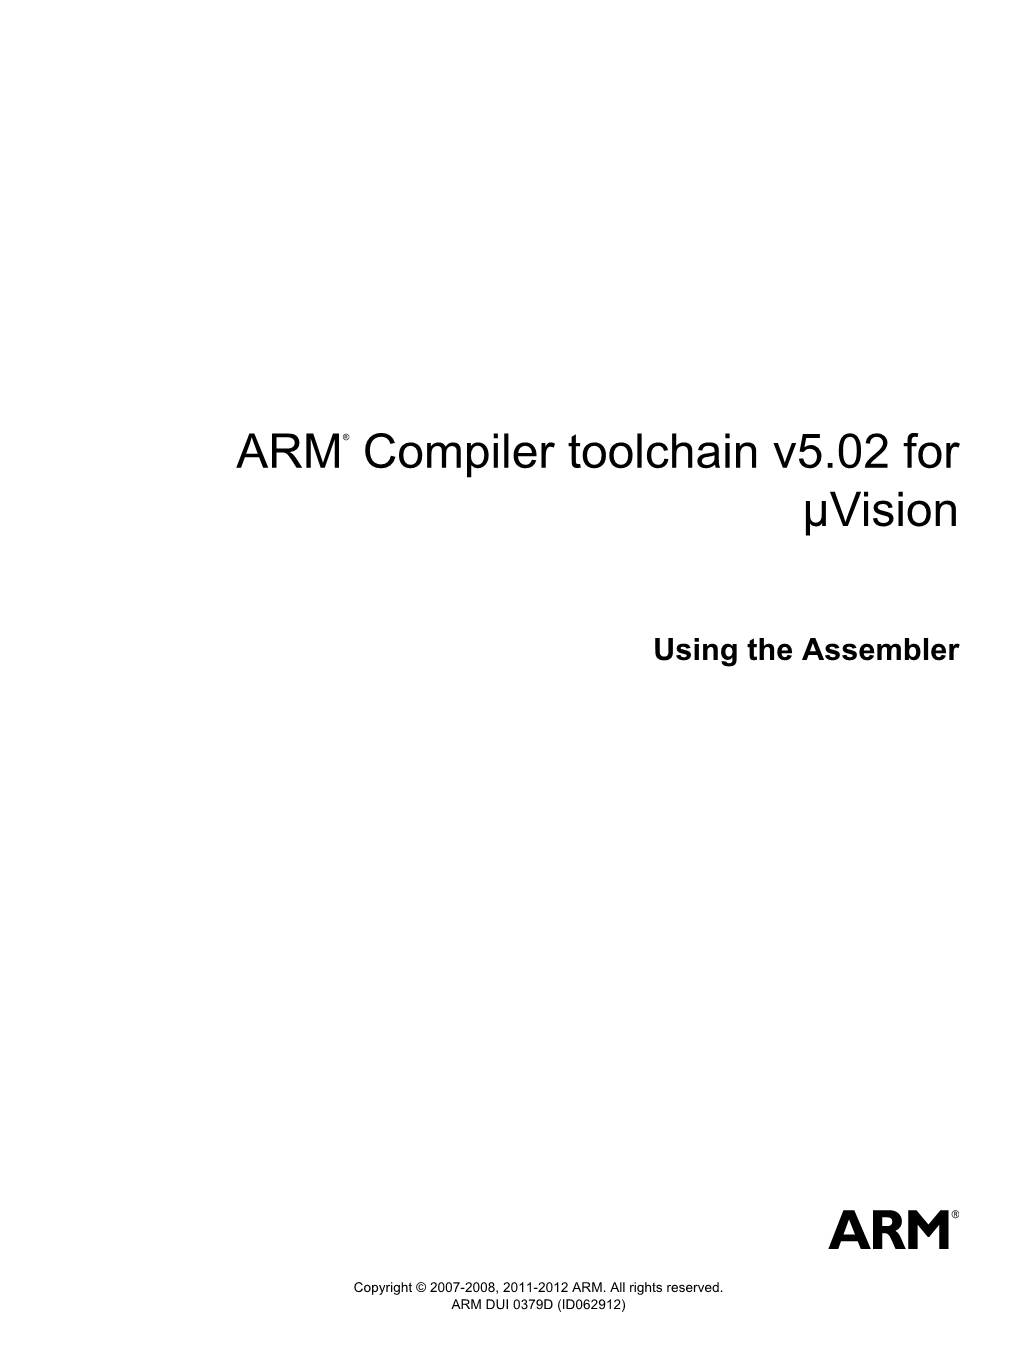 ARM Compiler Toolchain V5.02 for Μvision Using the Assembler